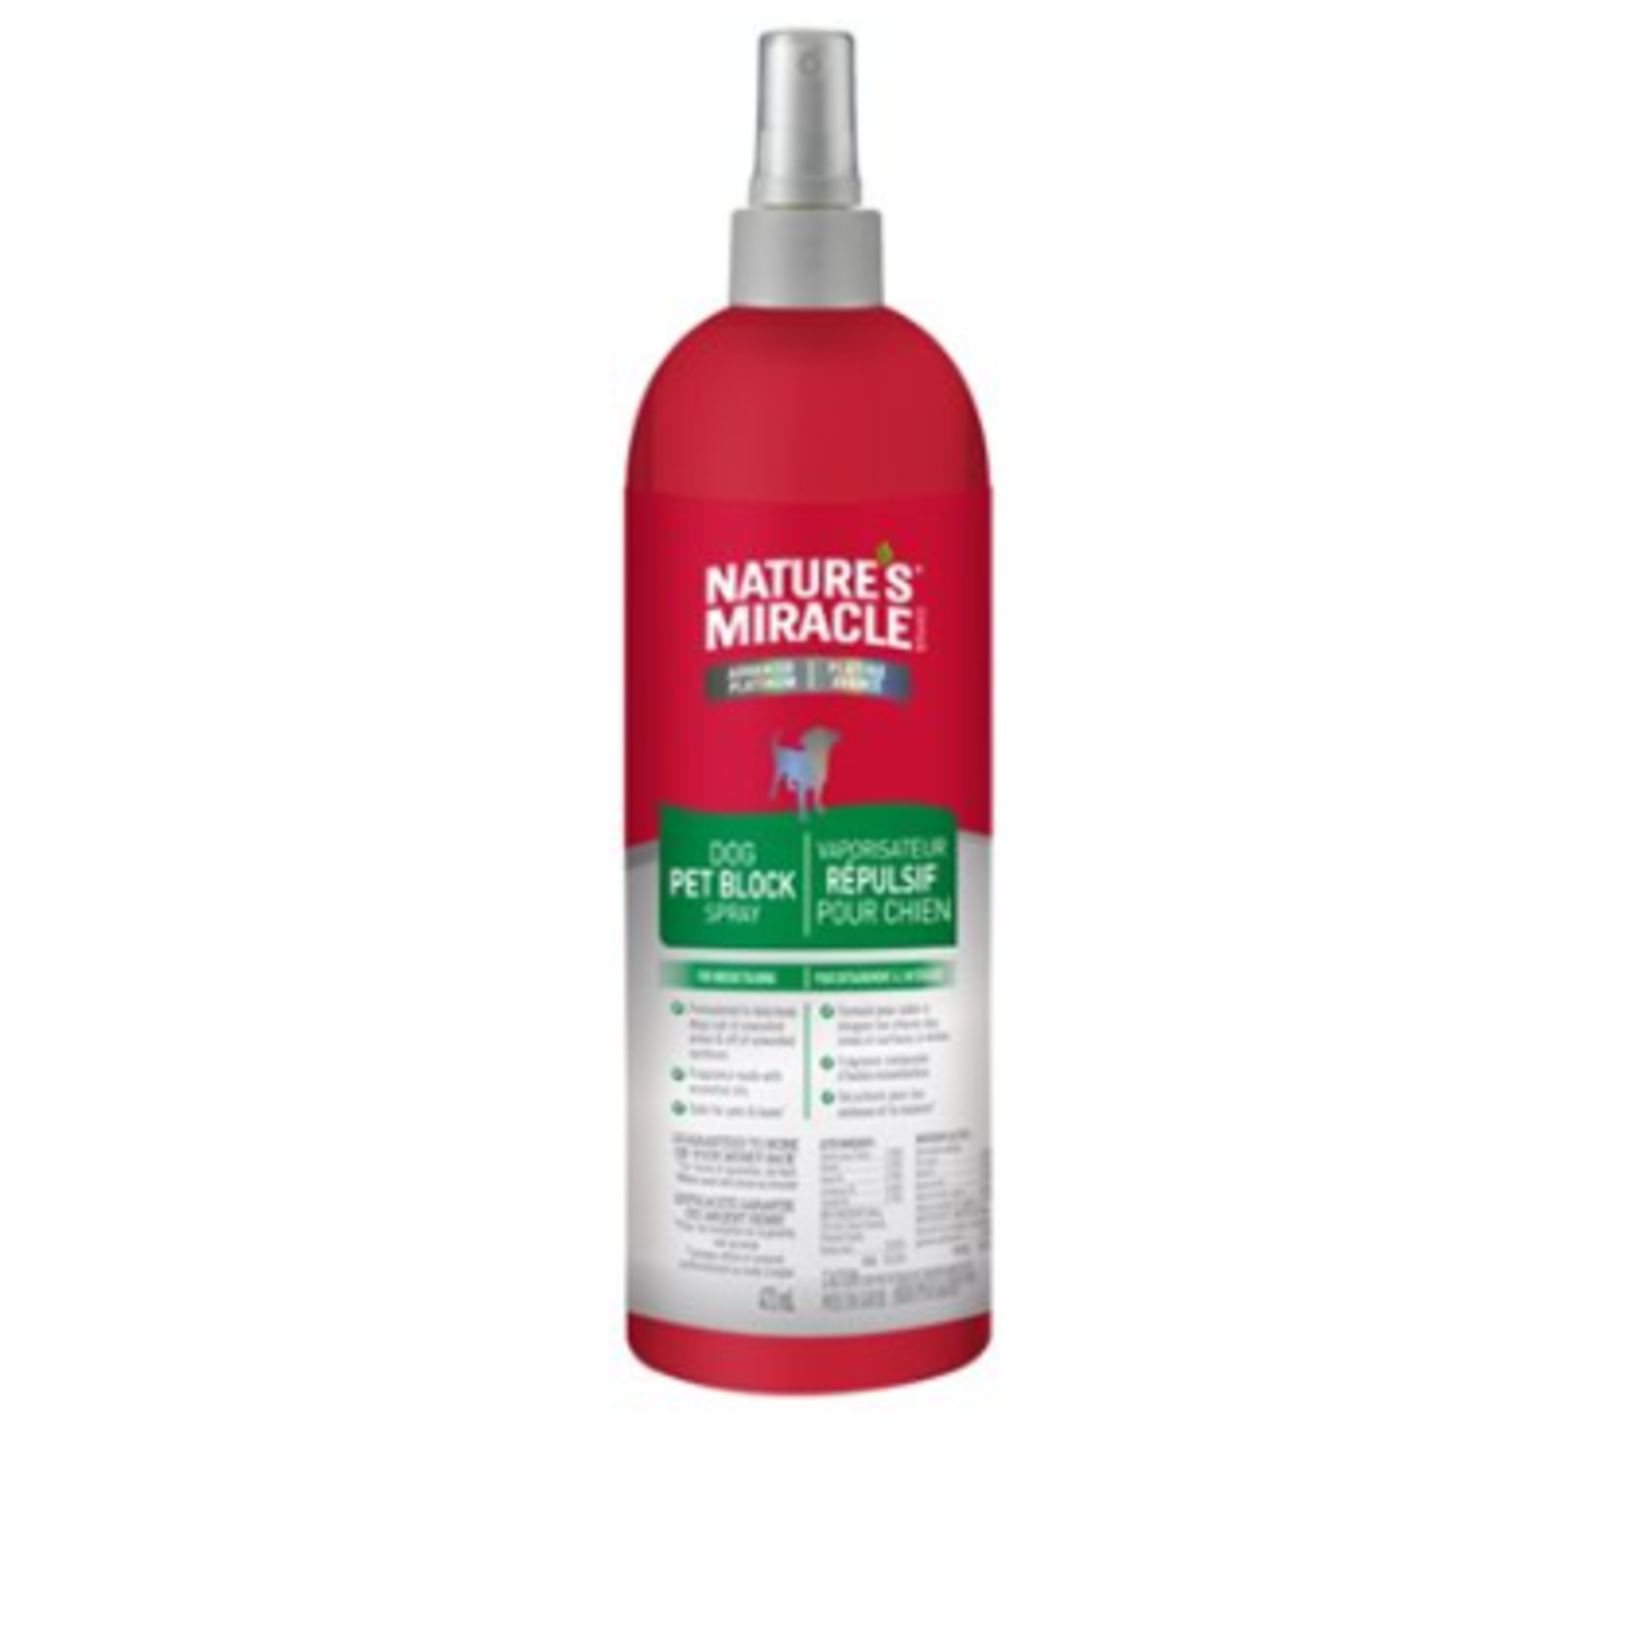 Nature's Miracle -  Dog repellent spray - 16 oz